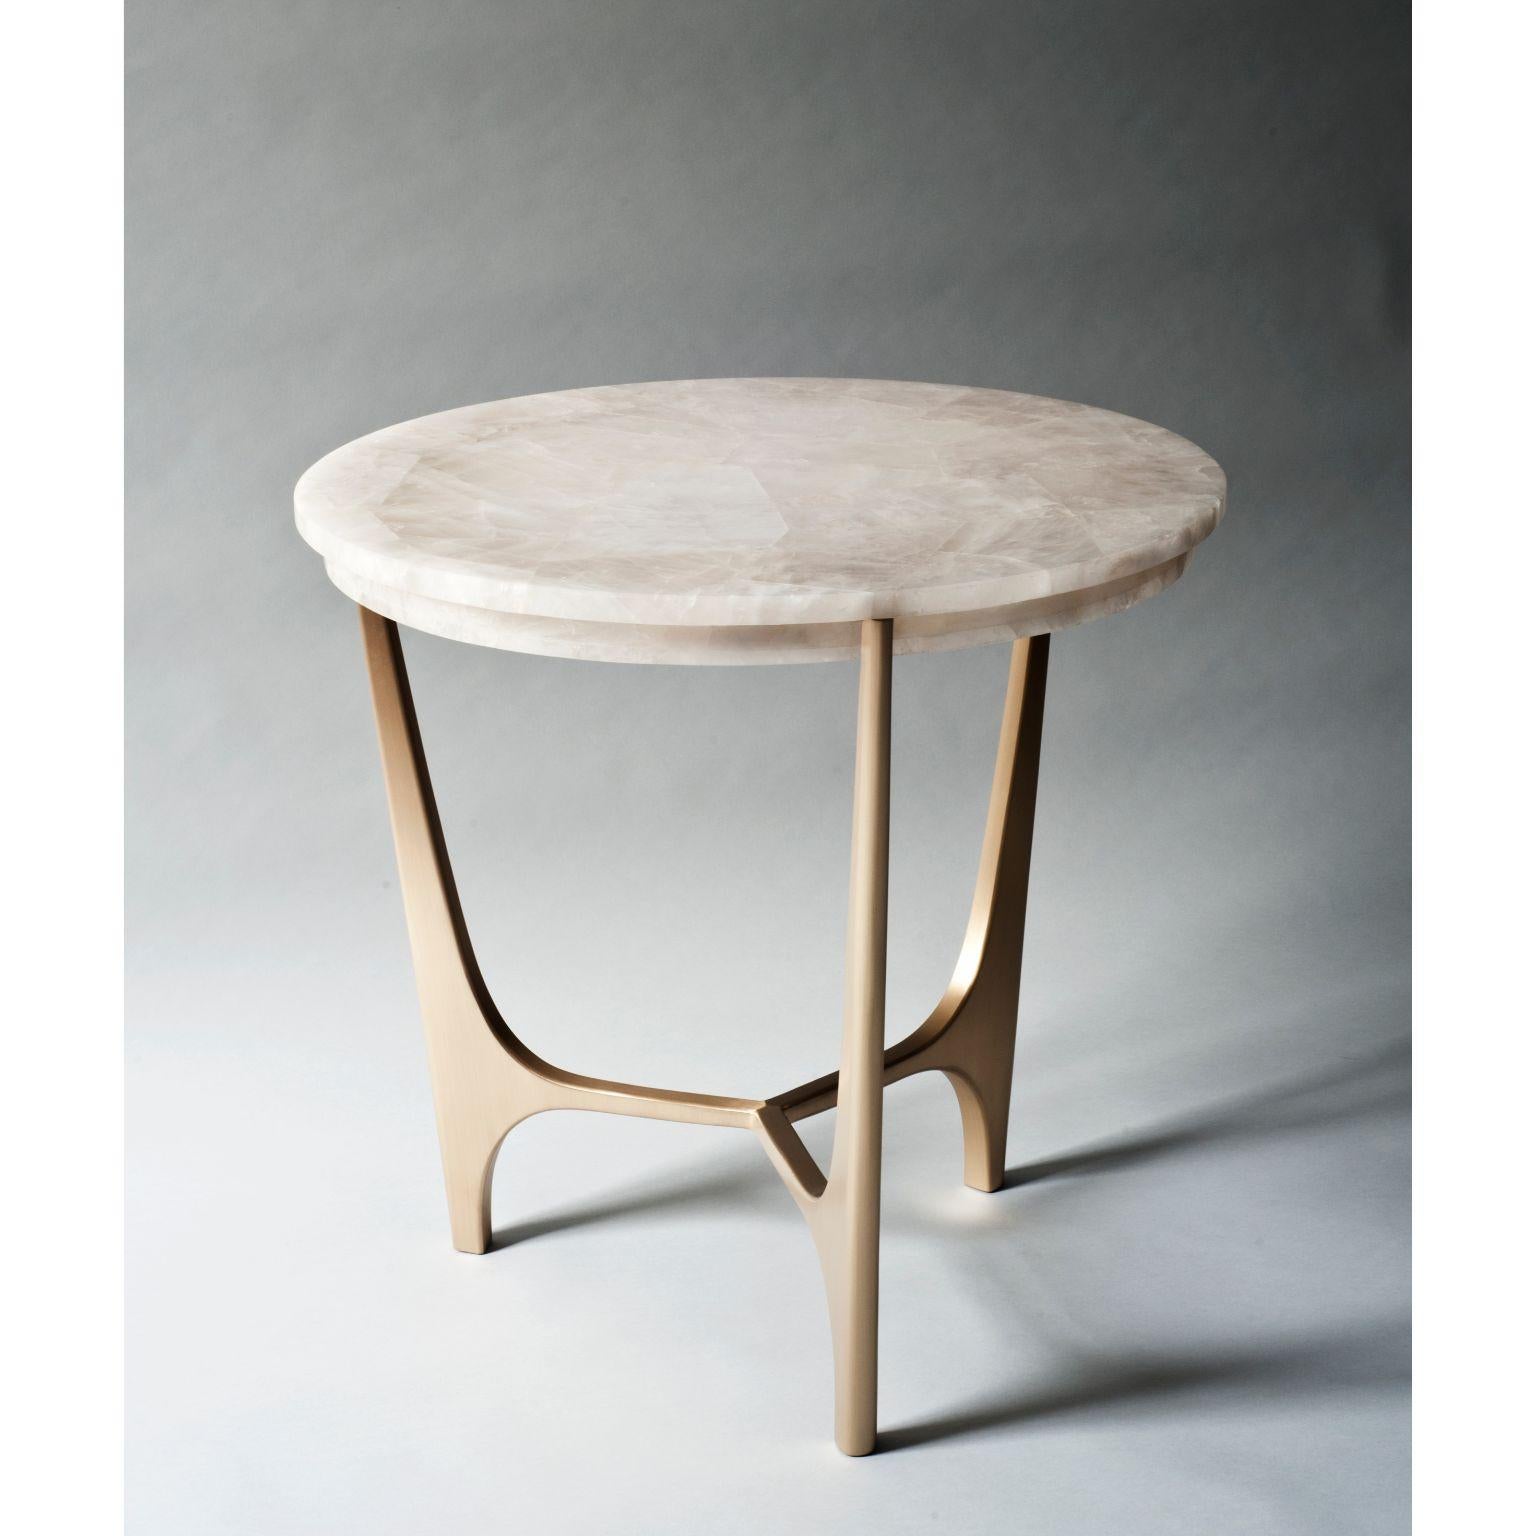 Athena side table by DeMuro Das
Dimensions: 57 x H 55 cm
Materials: Quartz (White) - Polished (Random) tabletop
Solid bronze - satin legs

Dimensions and finishes can be customized.

DeMuro Das is an international design firm and the